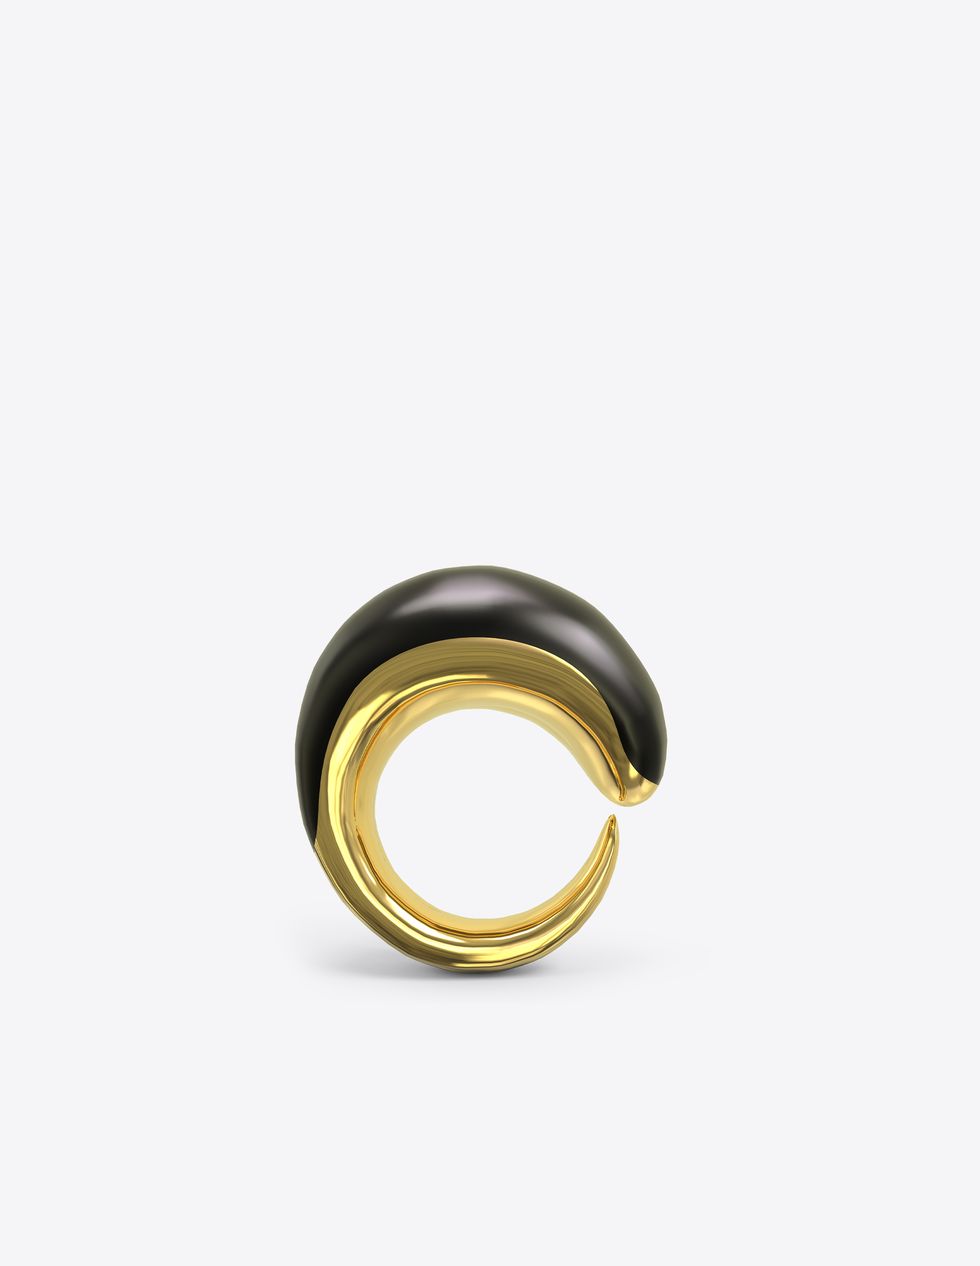 Shop the Chunky Ring Jewelry Trend for 2021